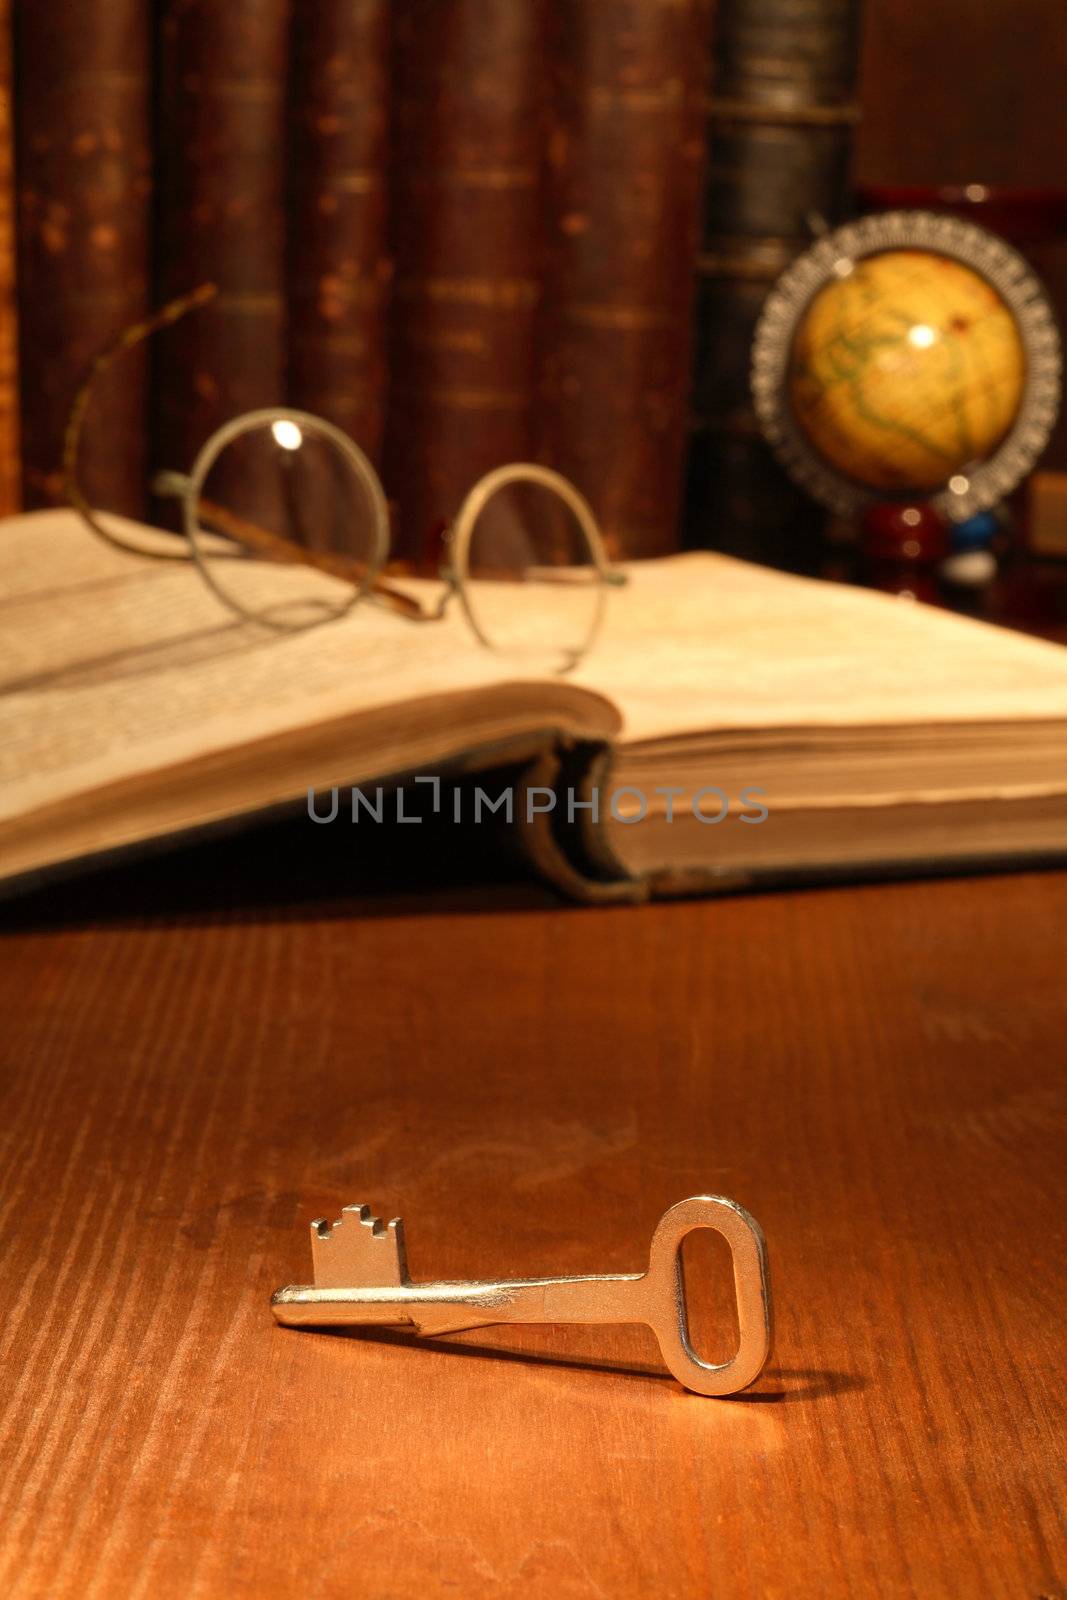 Old key lying on wooden background with books and spectacles